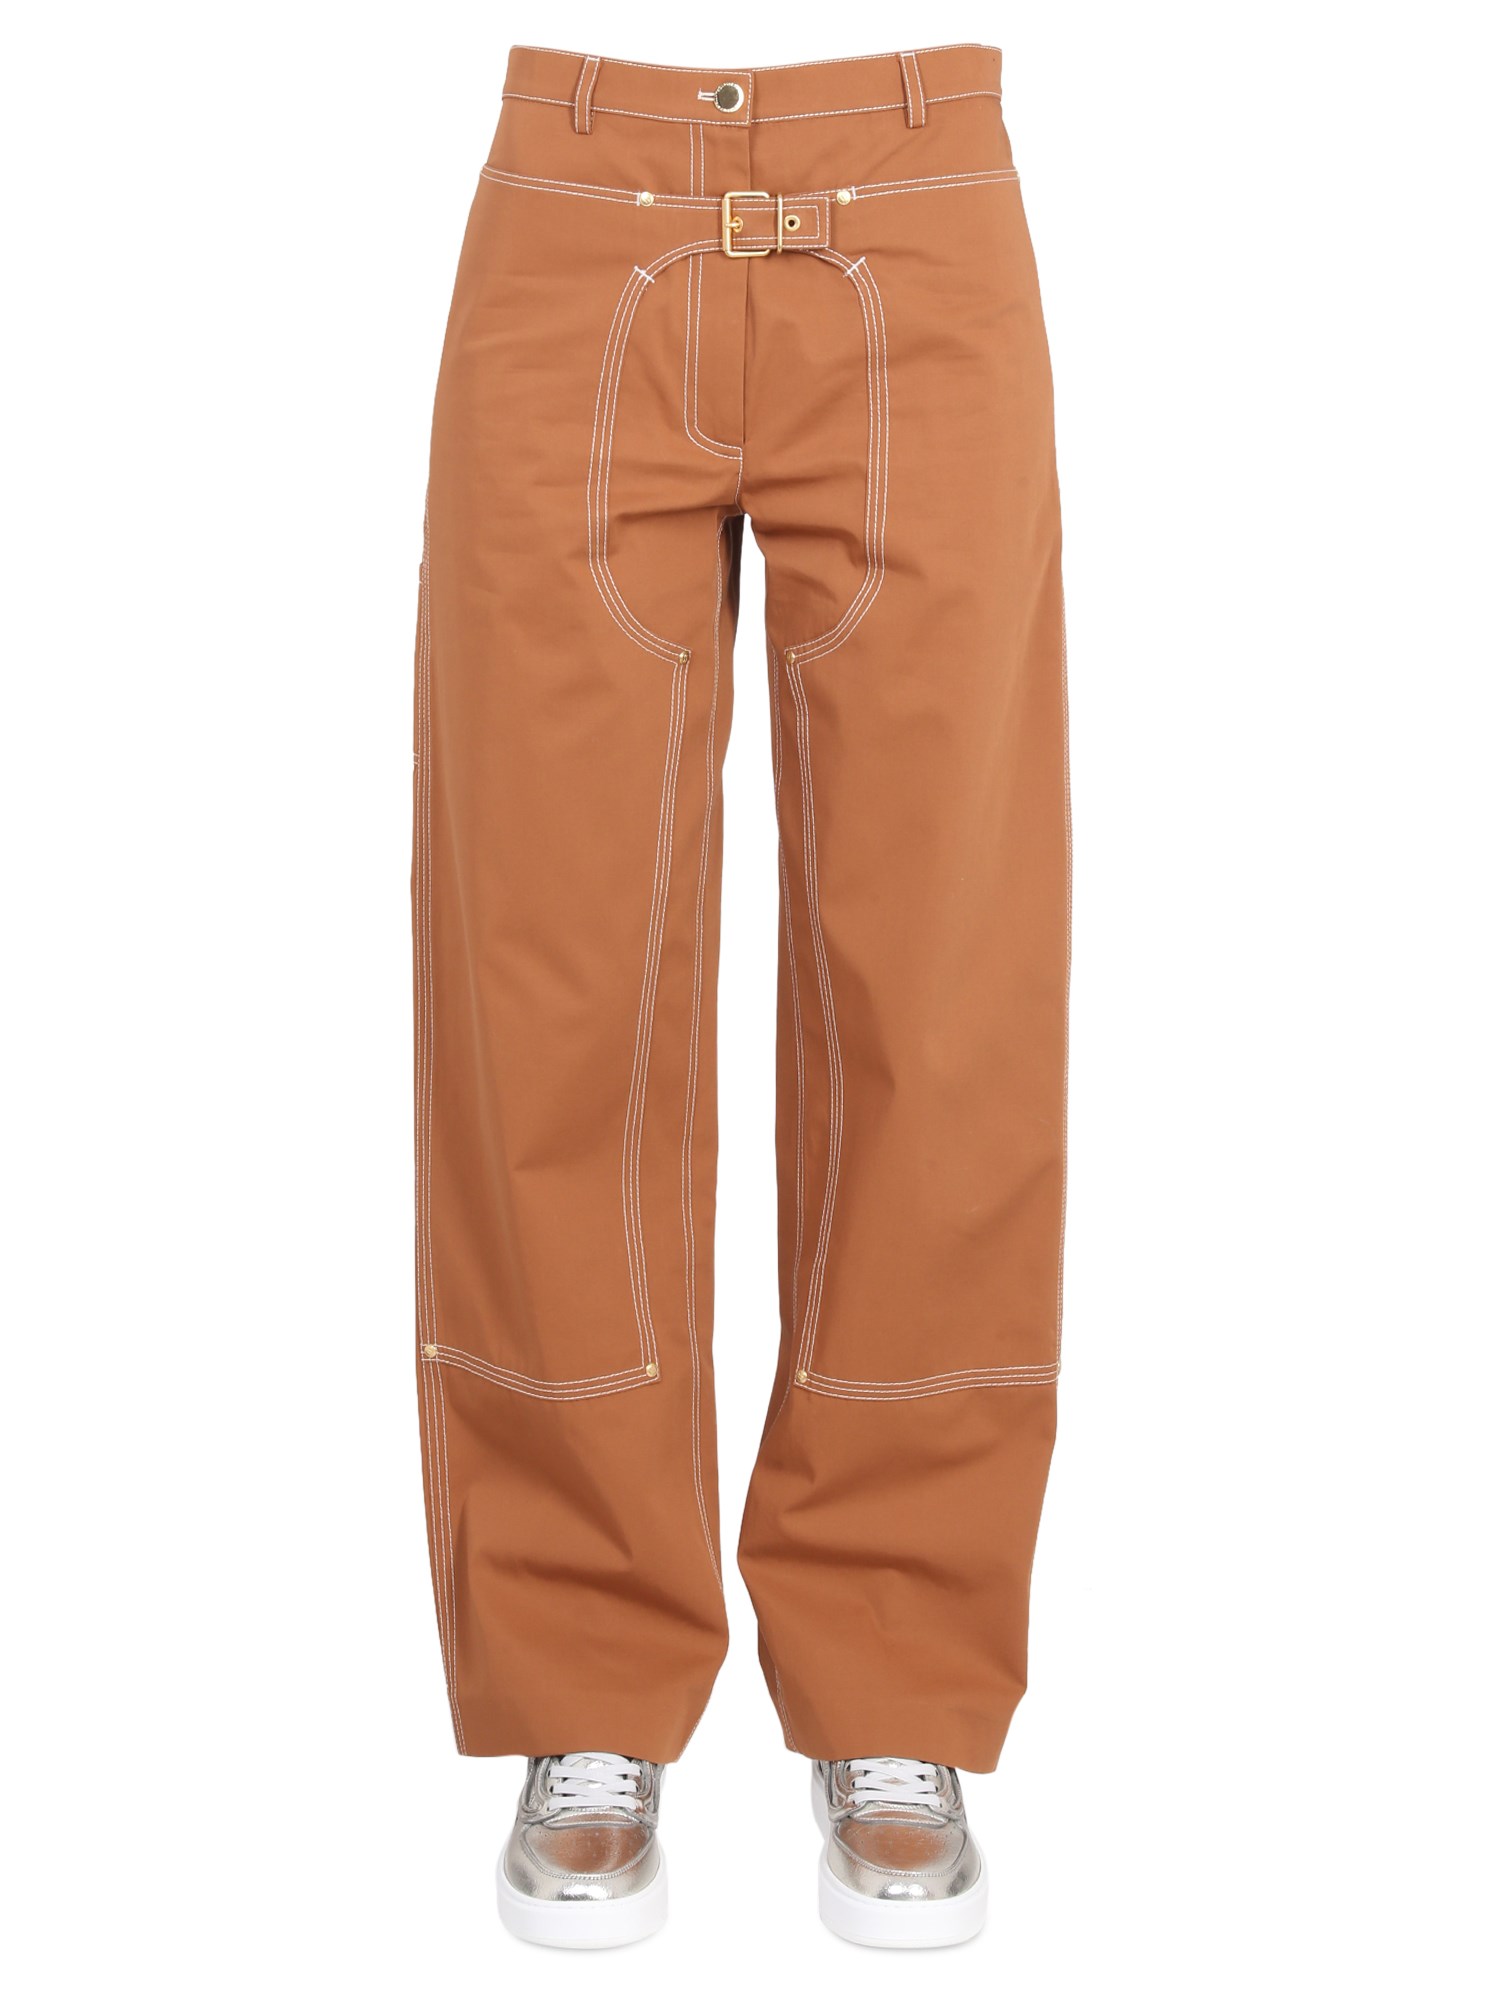 stella mccartney pants with buckle